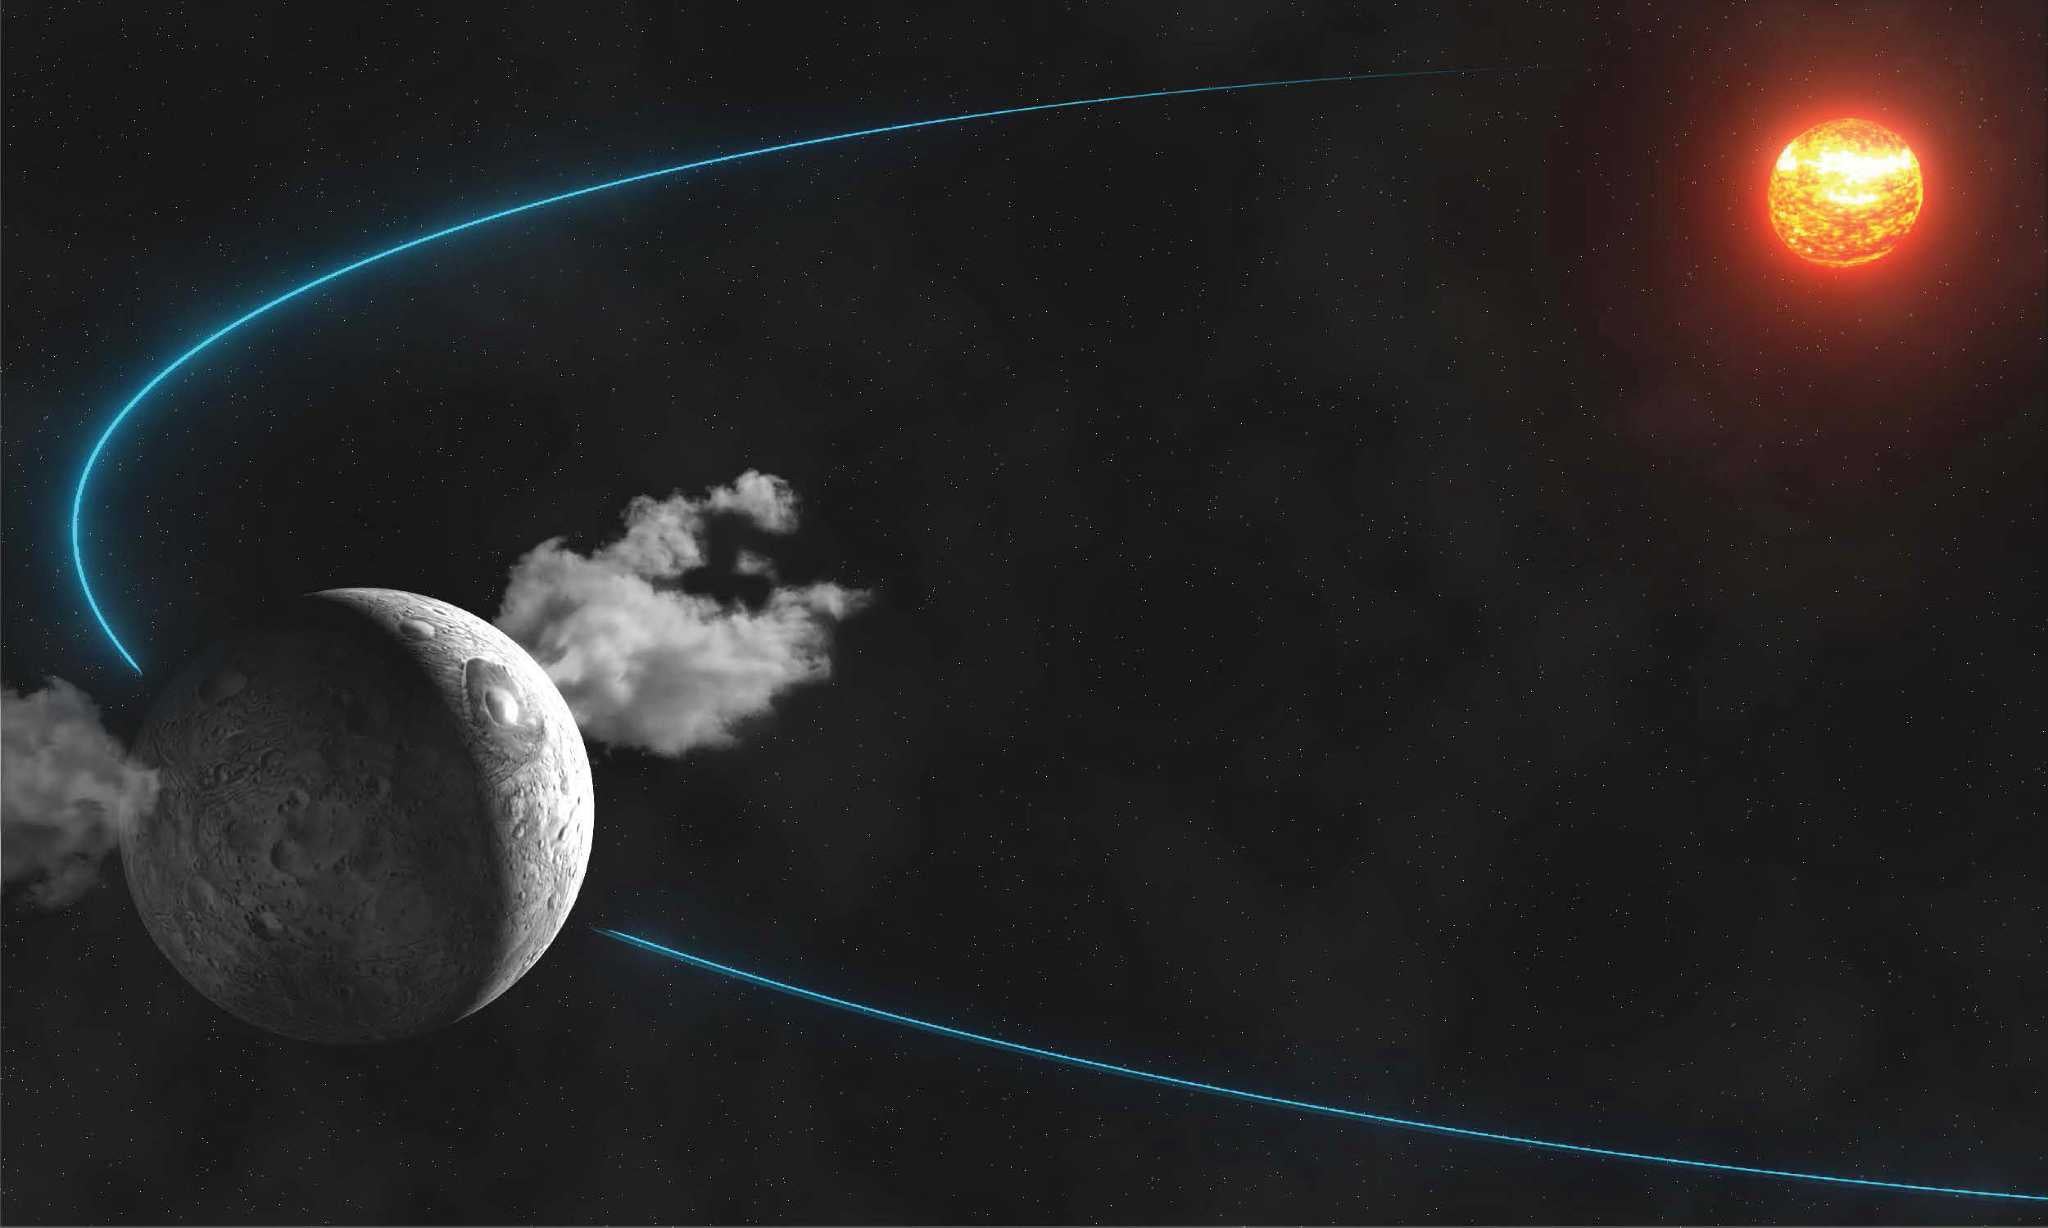 An artist's impression of the water vapour being emitted from the surface of the dwarf planet Ceres